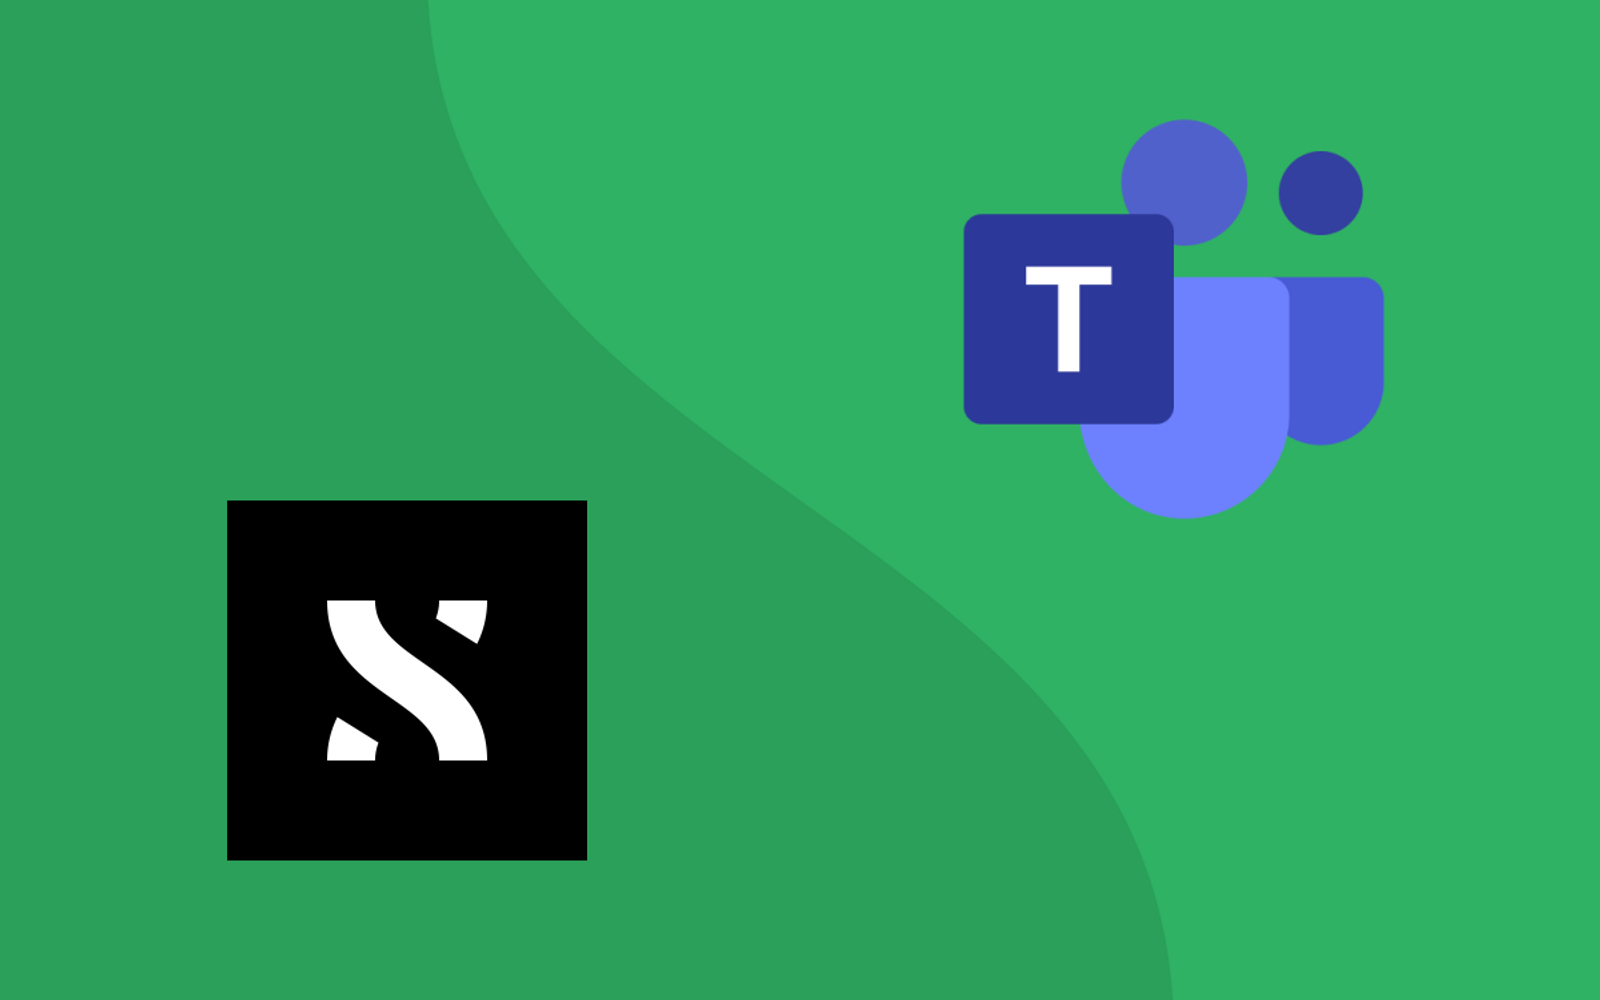 Logos of ShiftX and Microsoft Teams on a green background